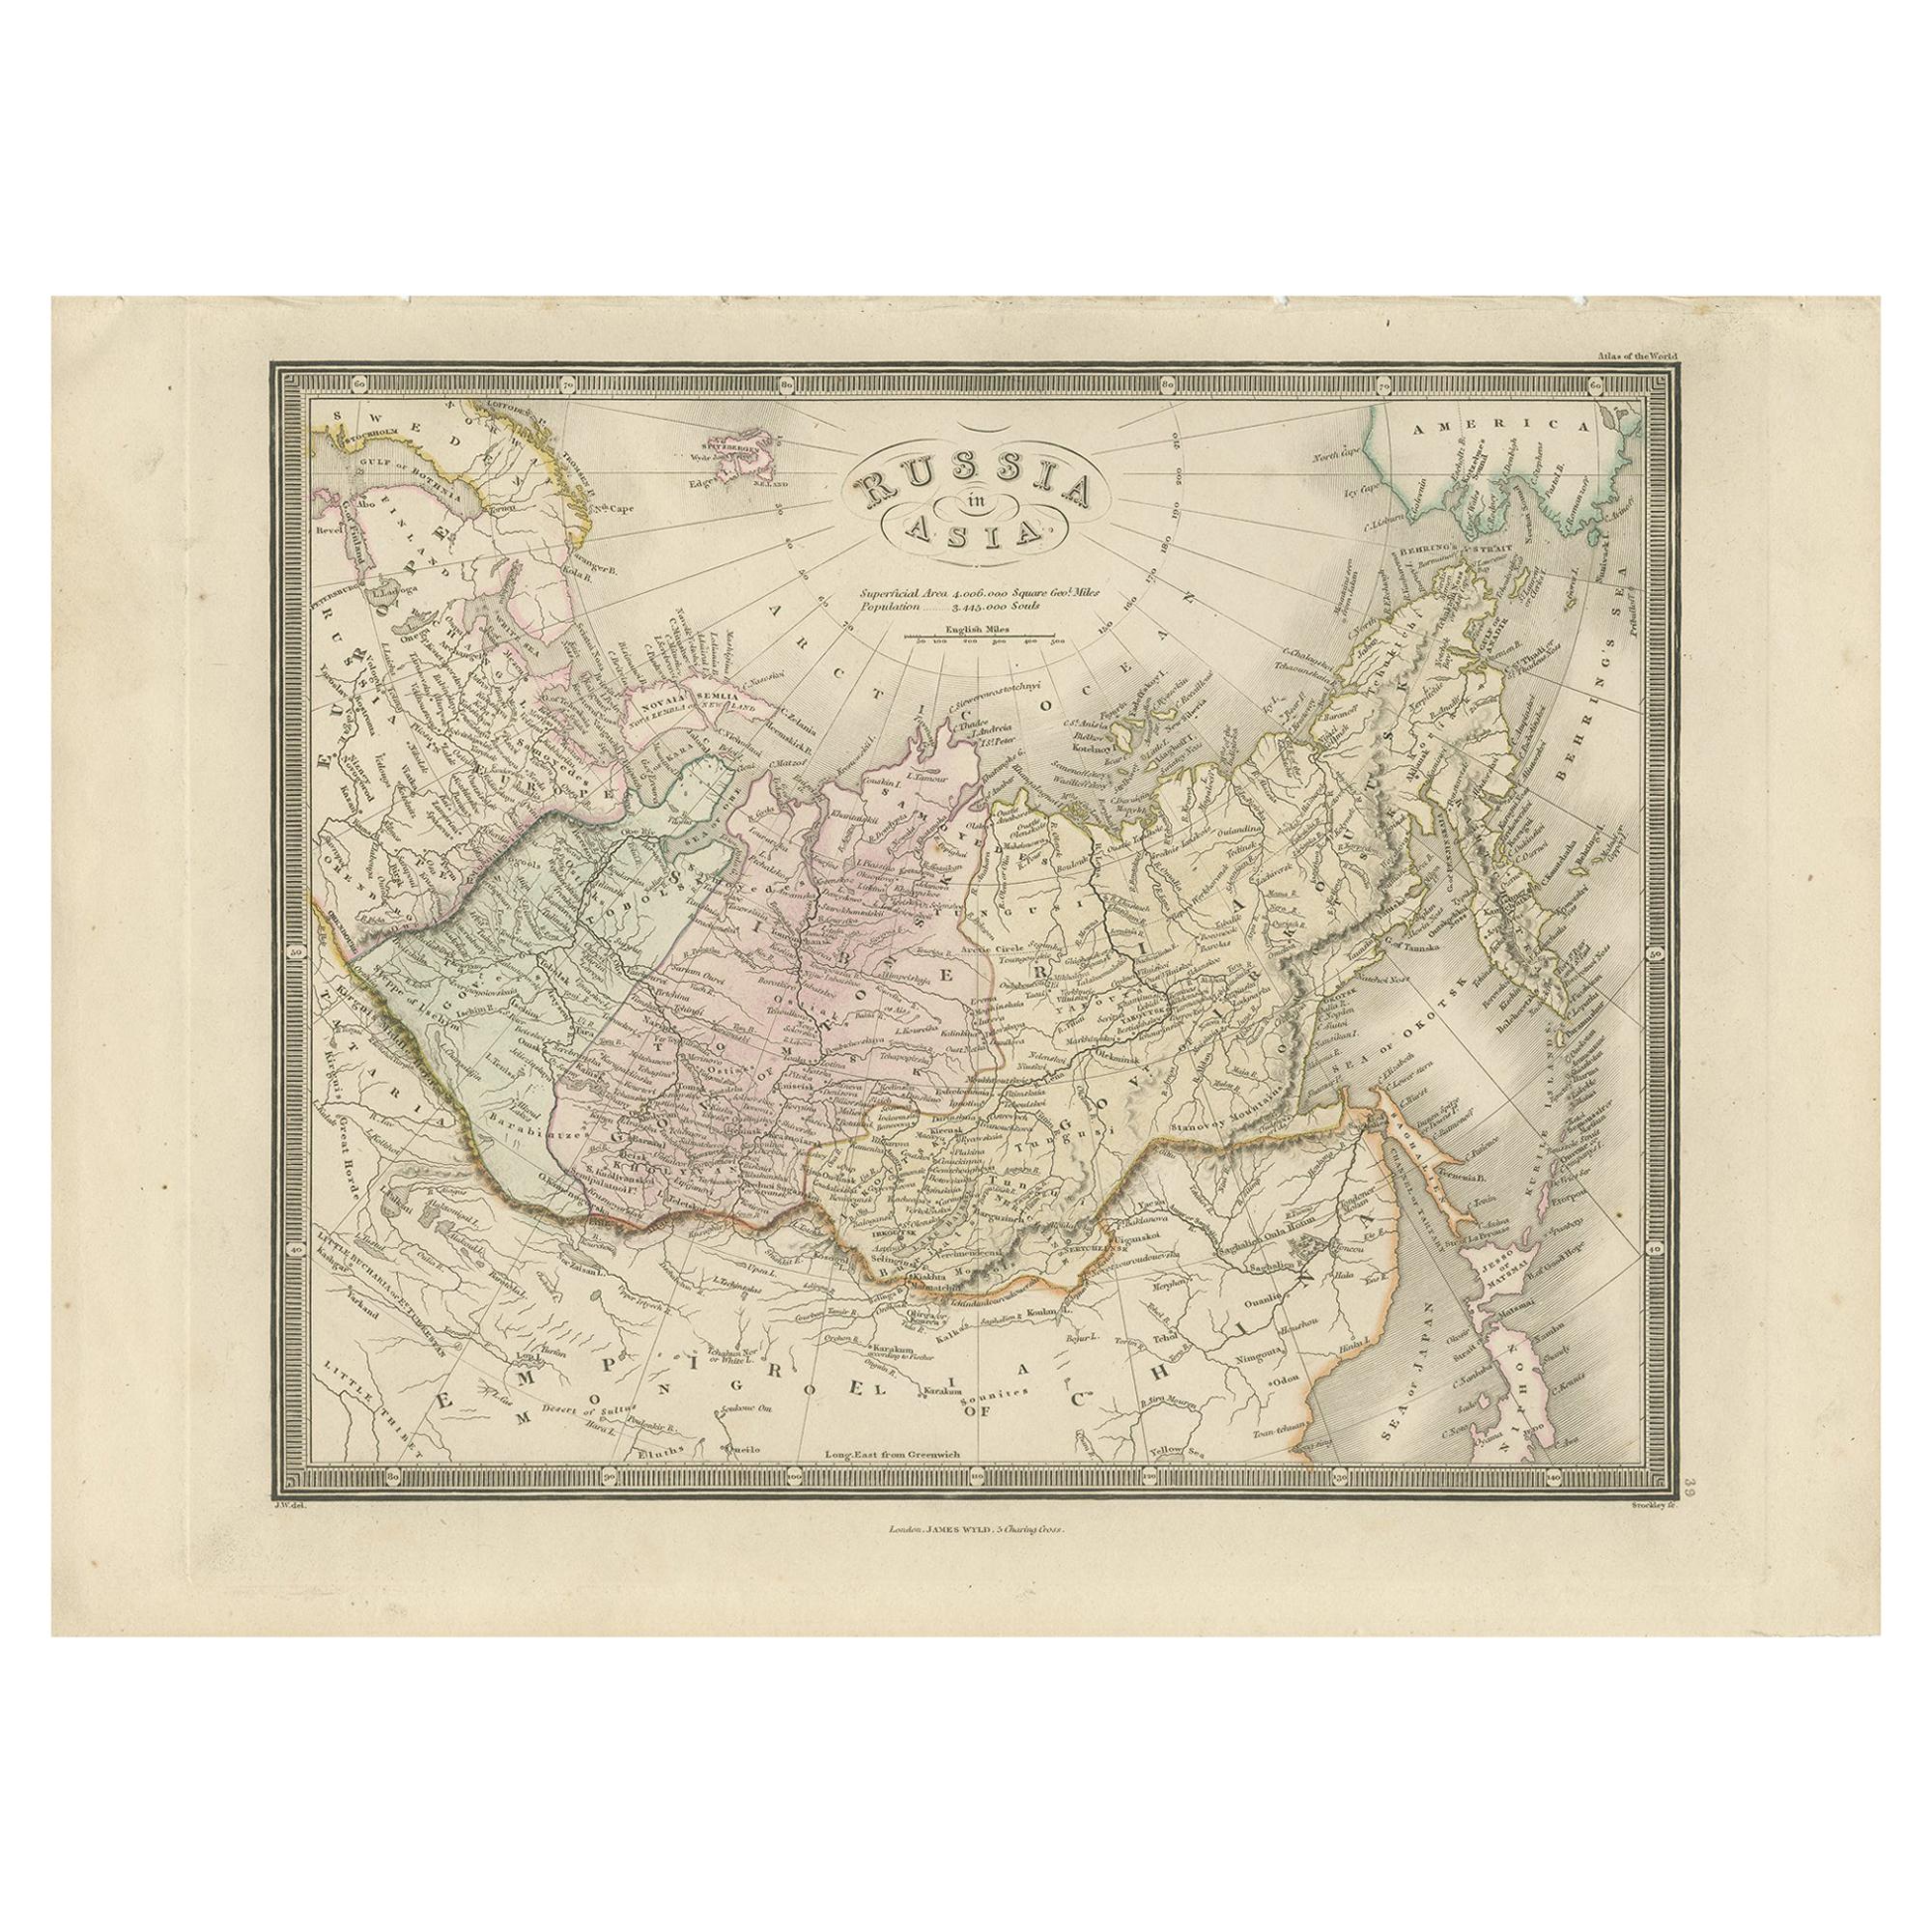 Antique Map of Russia in Asia by Wyld, '1845'